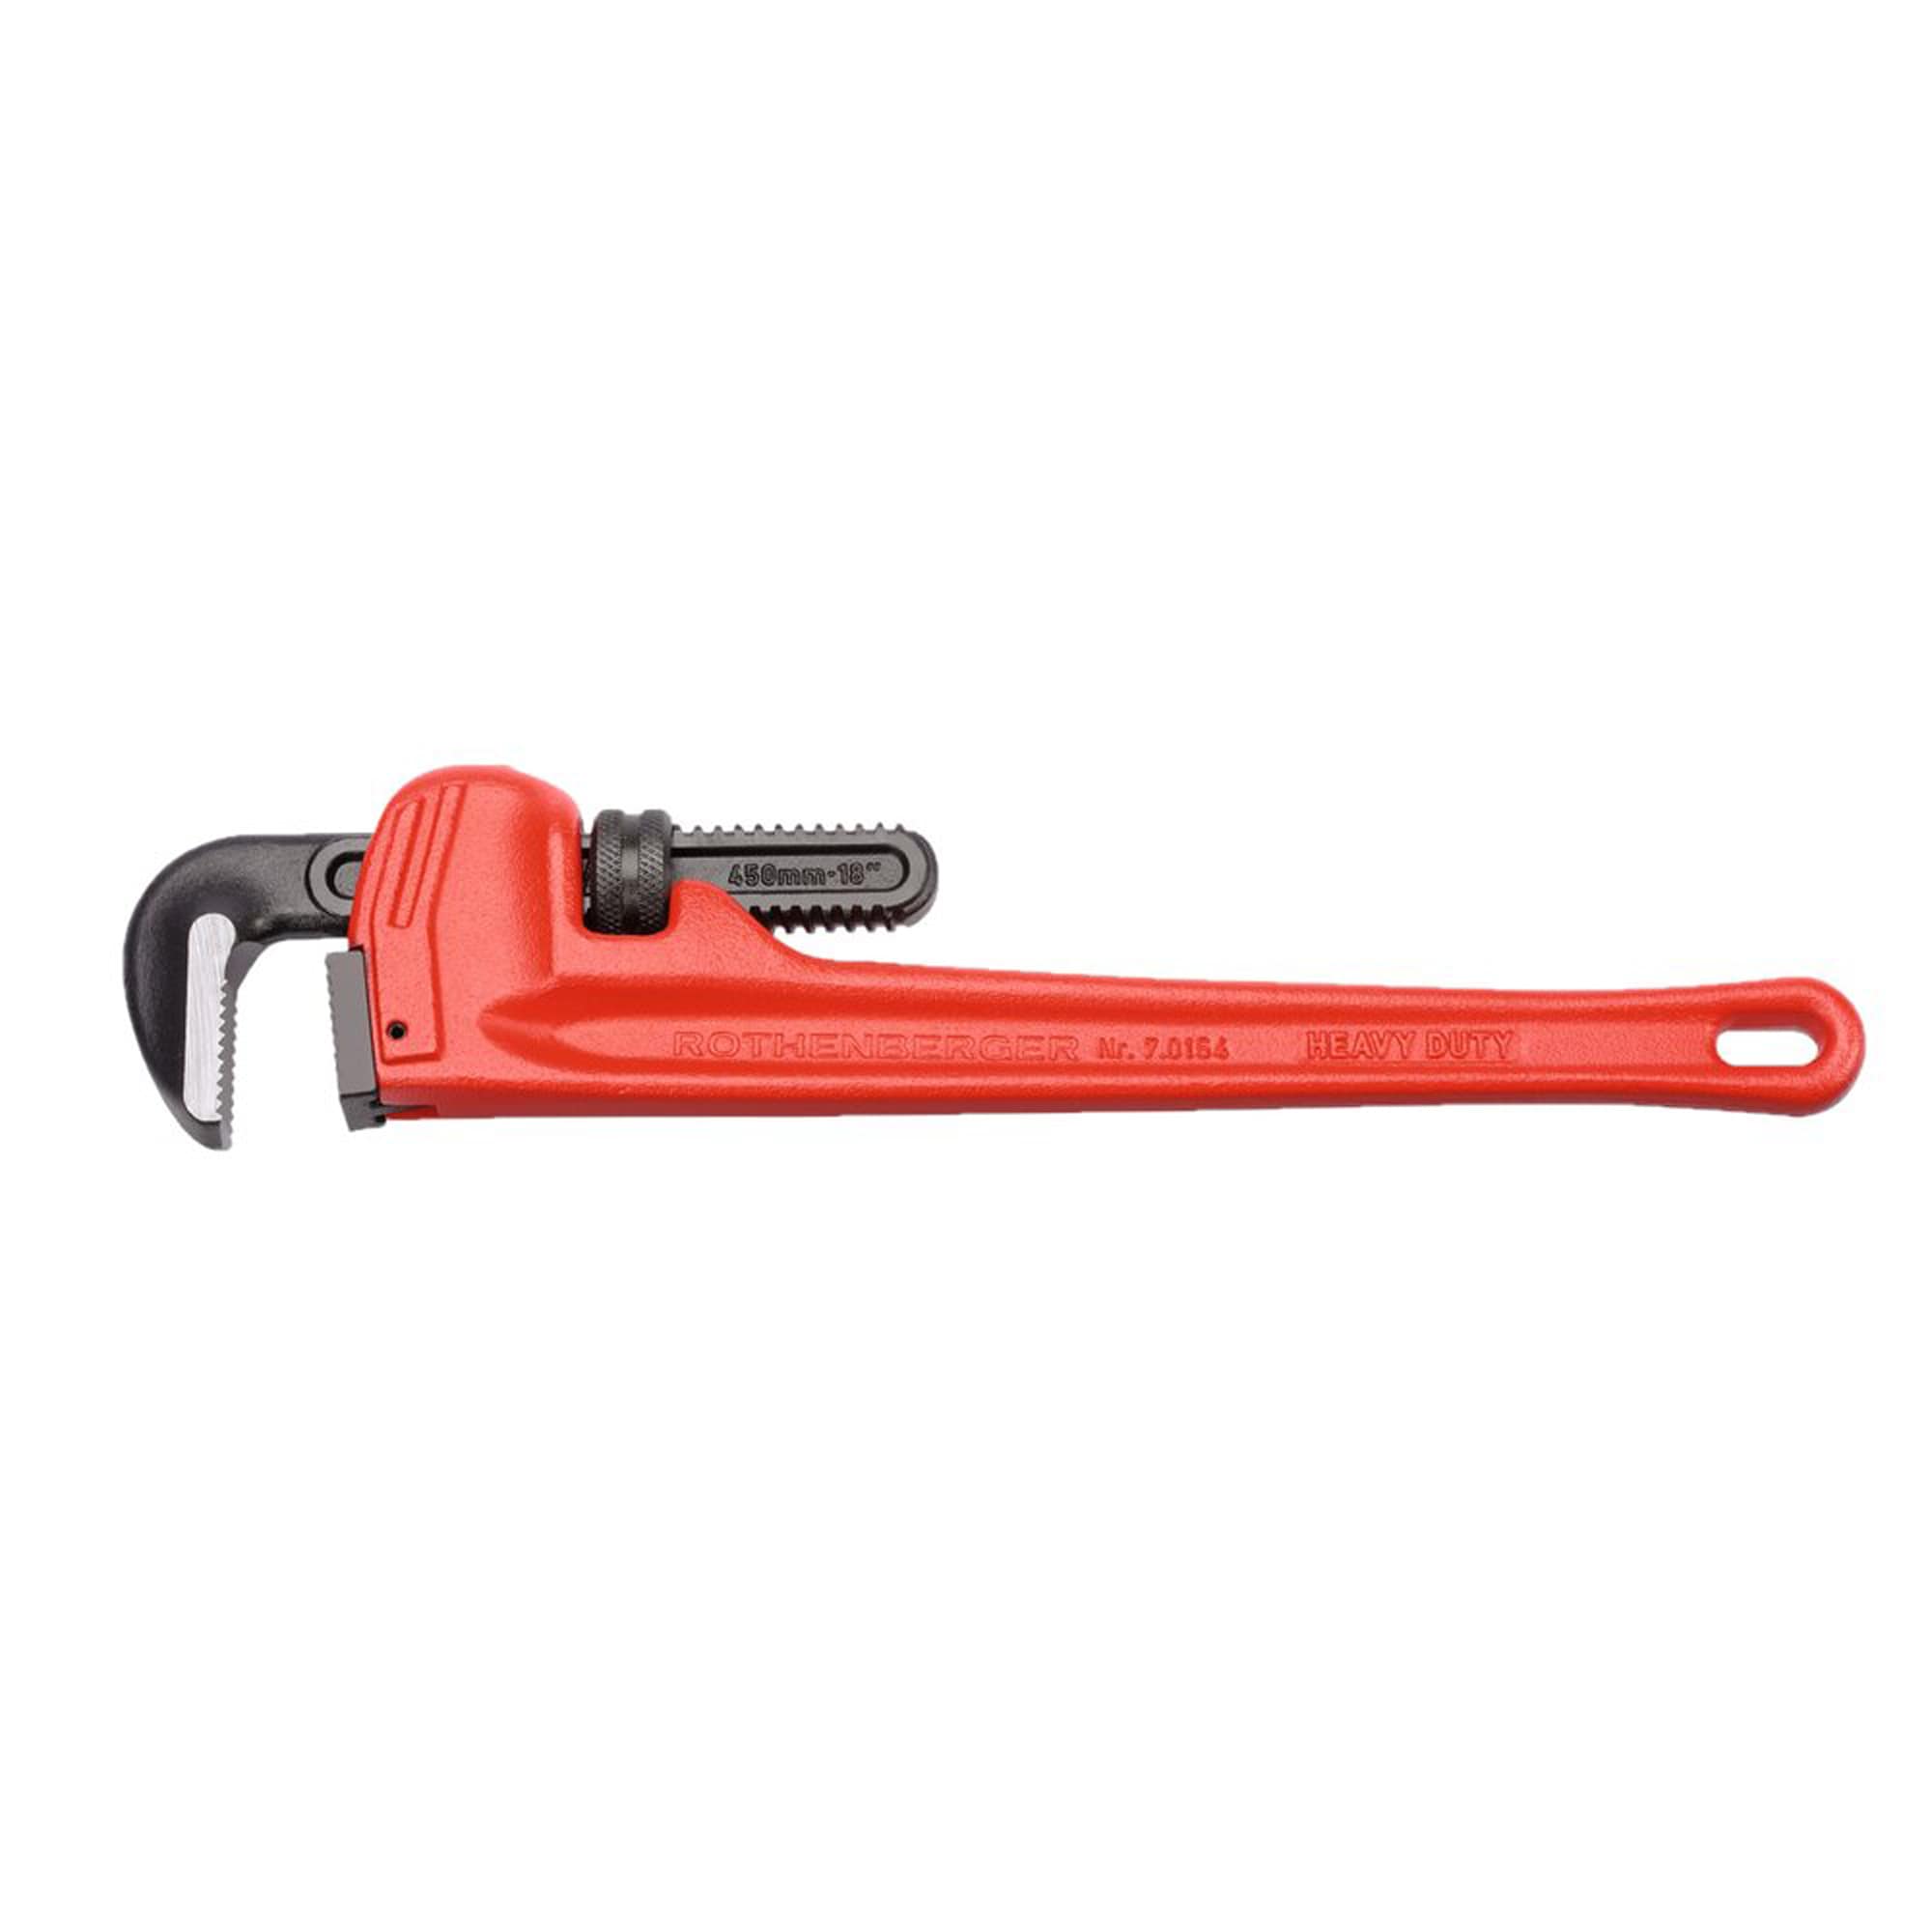 Rothenberger Pipe Wrenches at Lowes.com